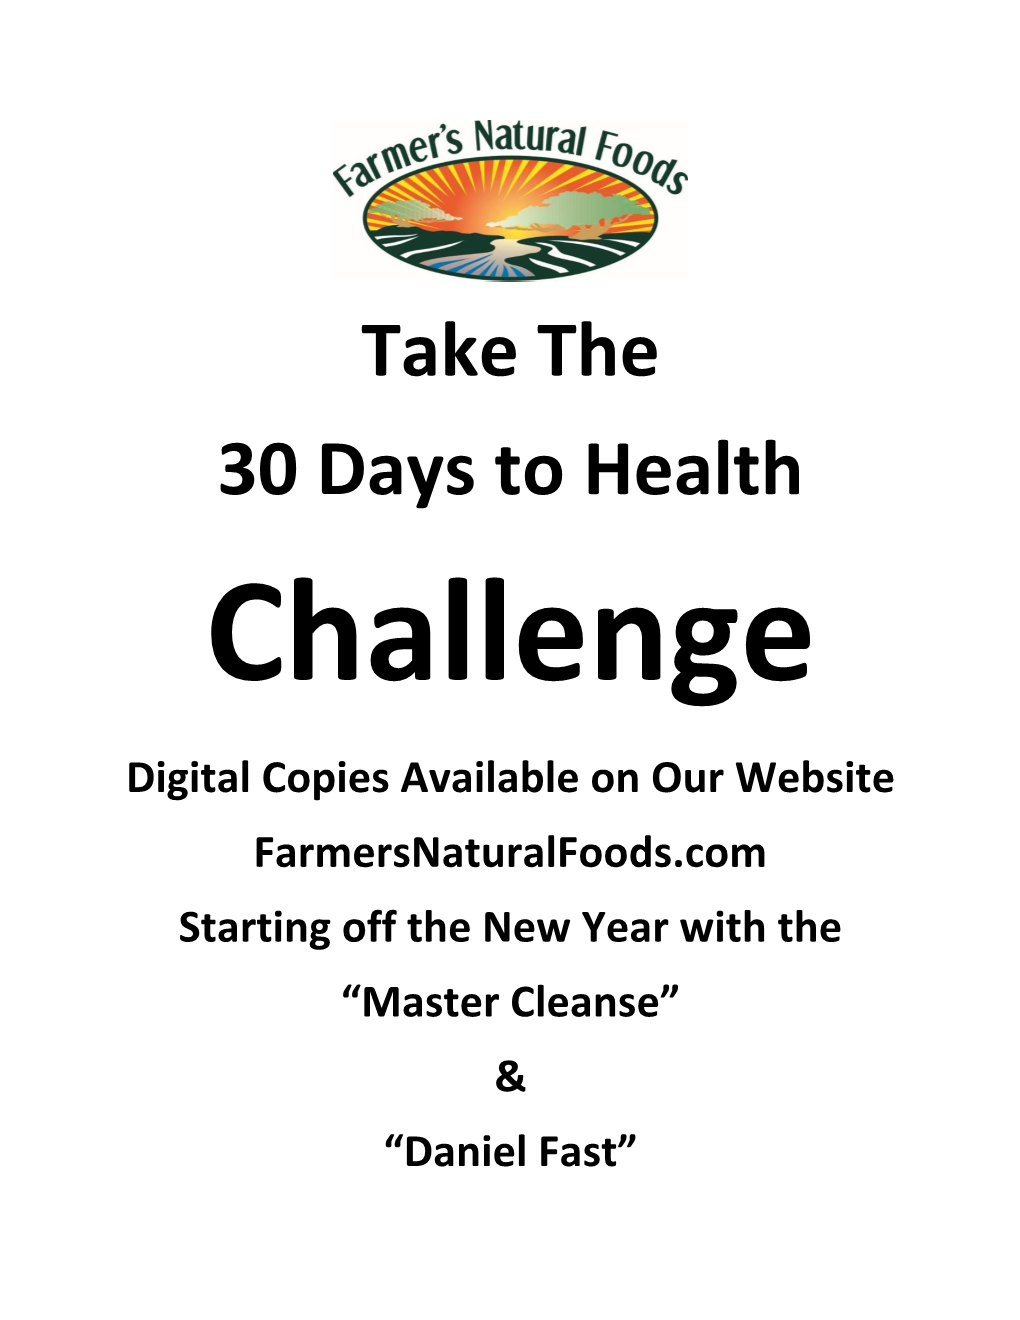 Take the 30 Days to Health